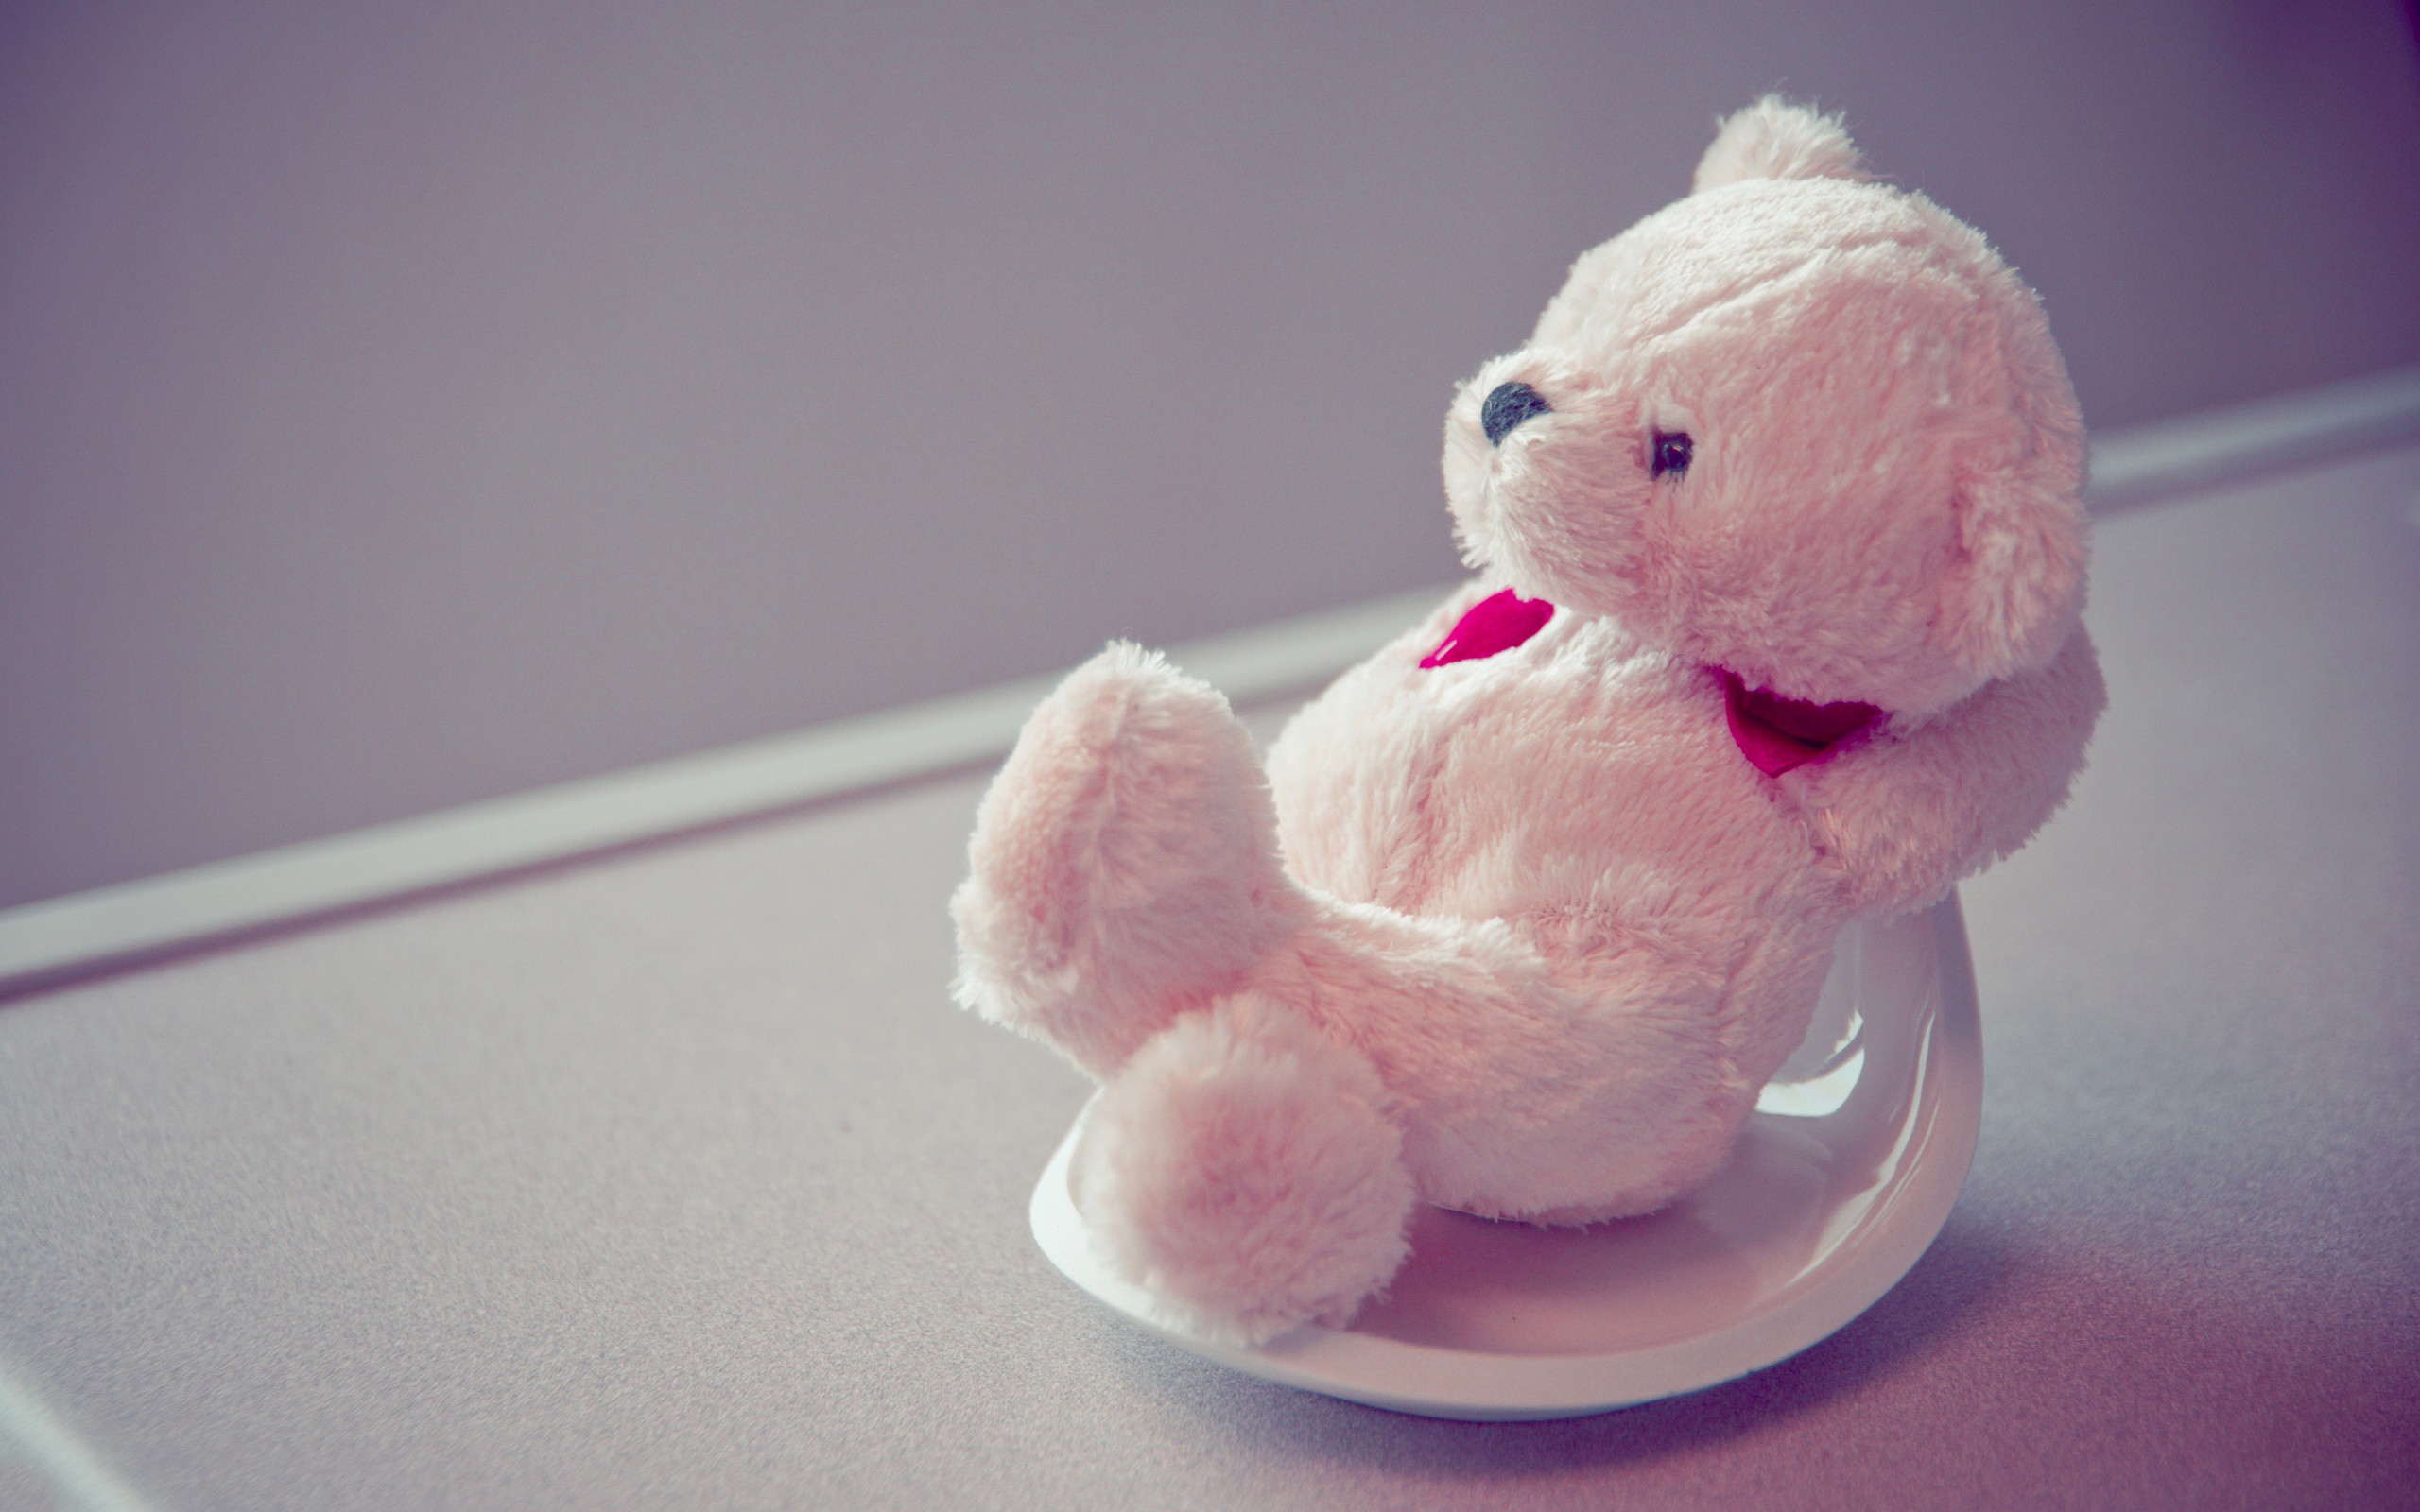 833537 Teddy bear White background  Rare Gallery HD Wallpapers